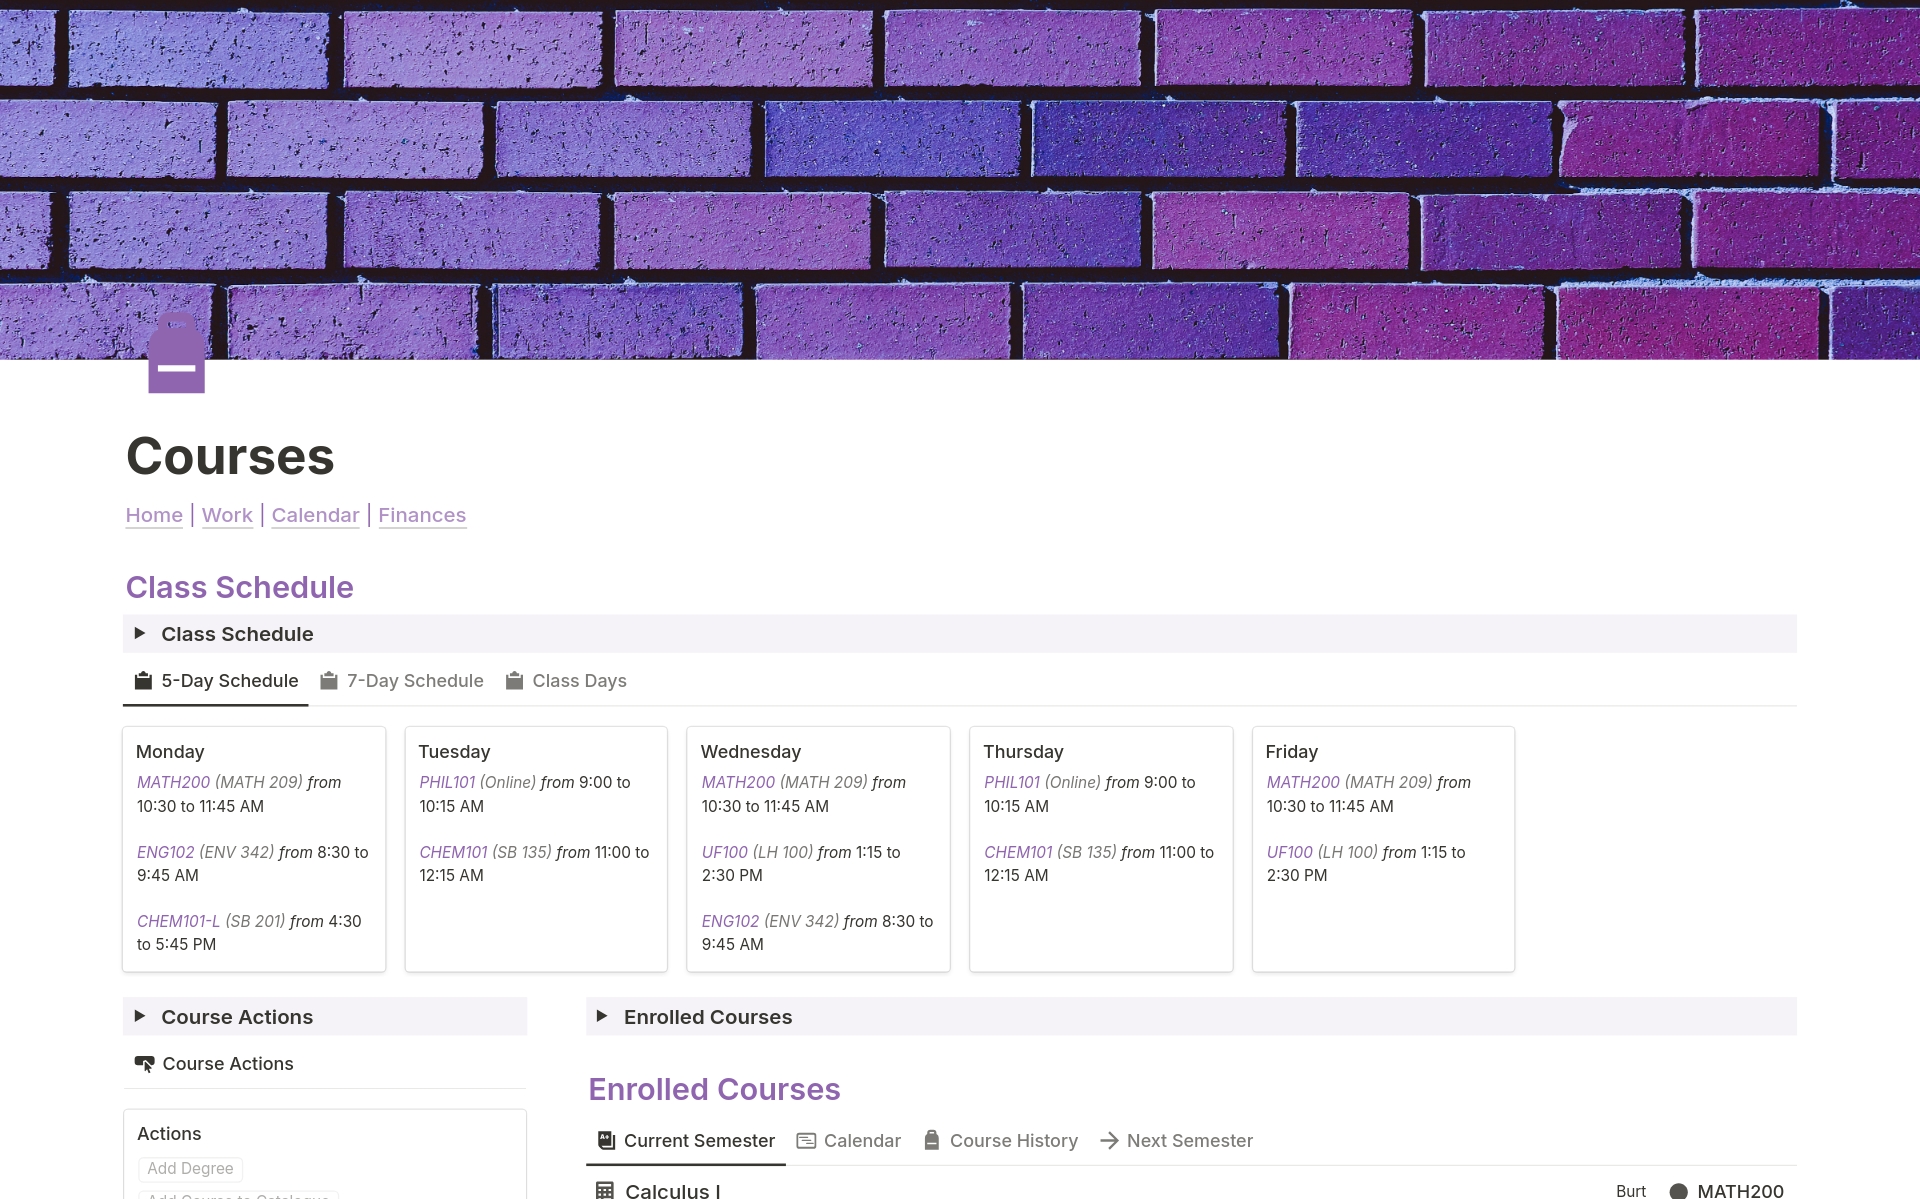 A comprehensive Notion template to help track your courses, assignments, notes, grades, finances, calendars and more!